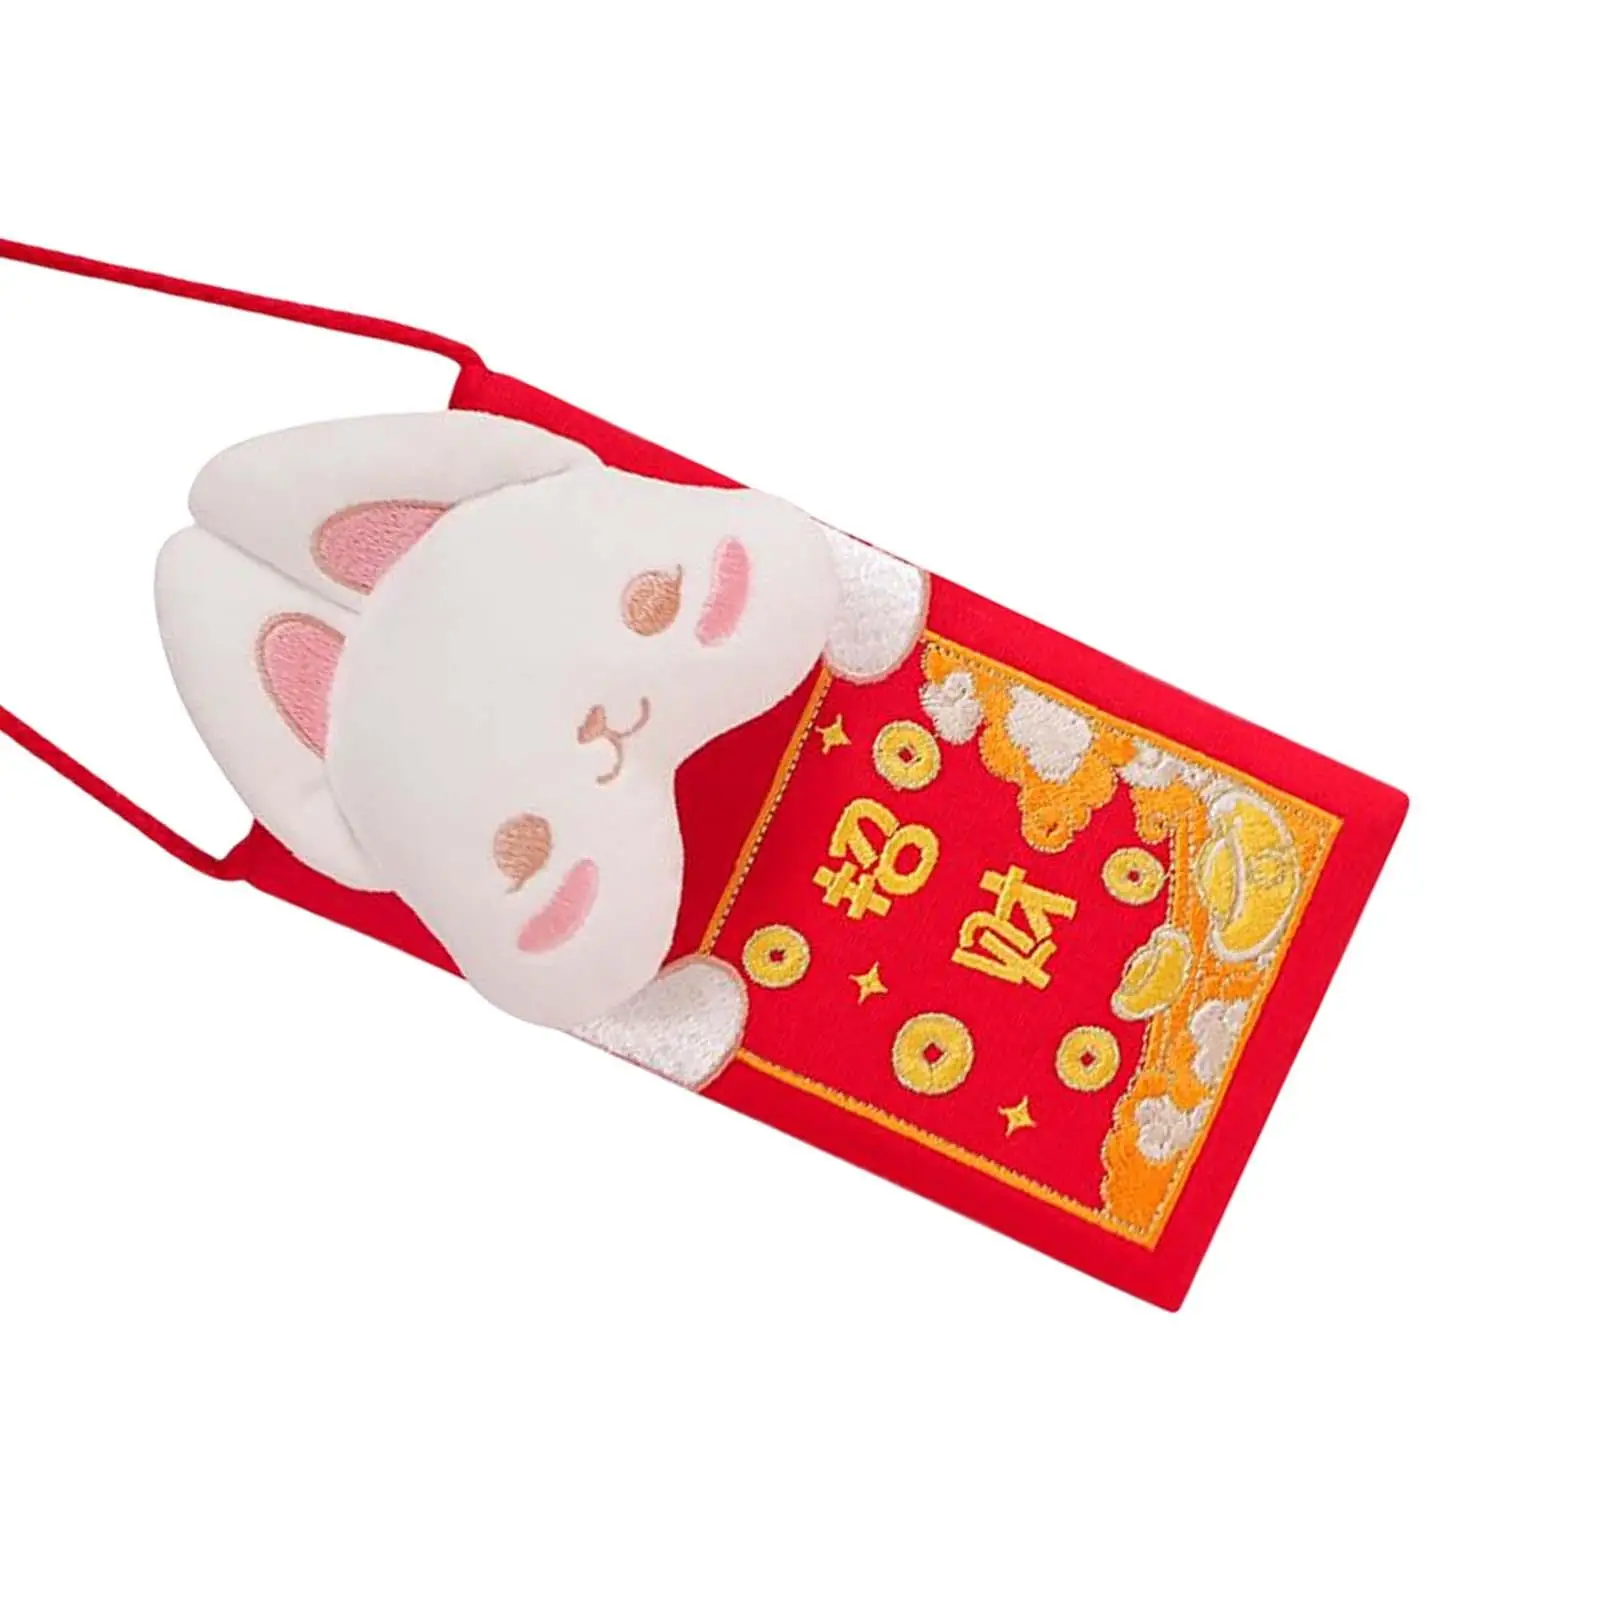 Chinese New Year Red Envelope Shoulder Bag Rabbit Purse Hong Bao Bunny Red Pocket for Party Wedding Birthday Decor